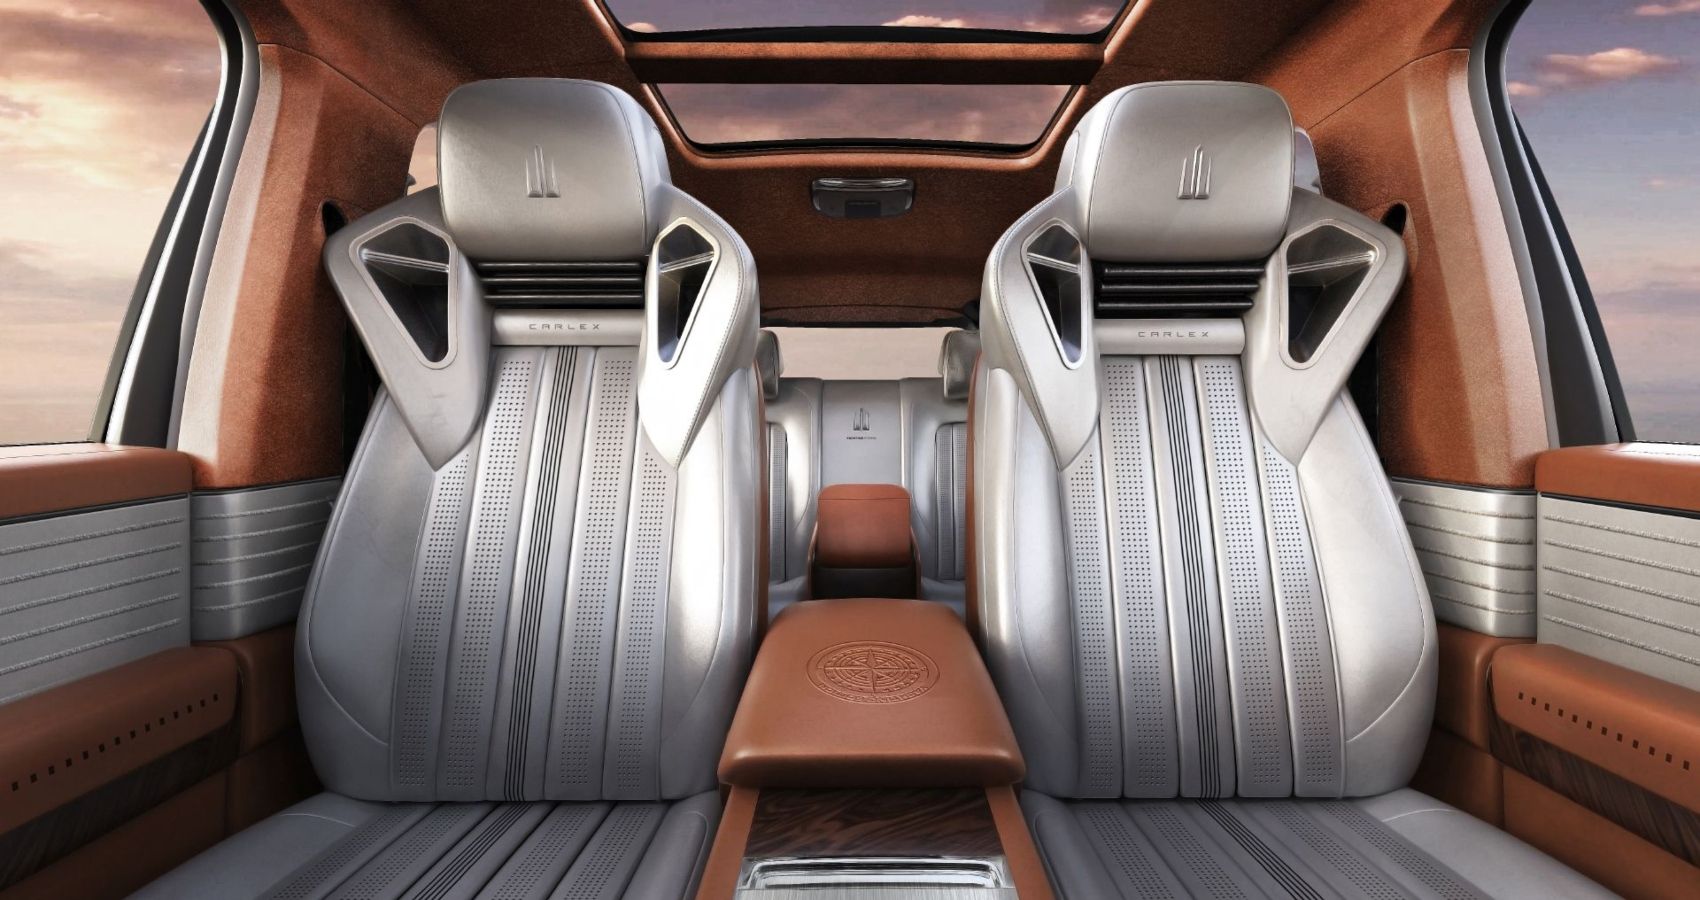 Front seats of Rolls Royce Cullinan Yachting Edition by Carlex Design